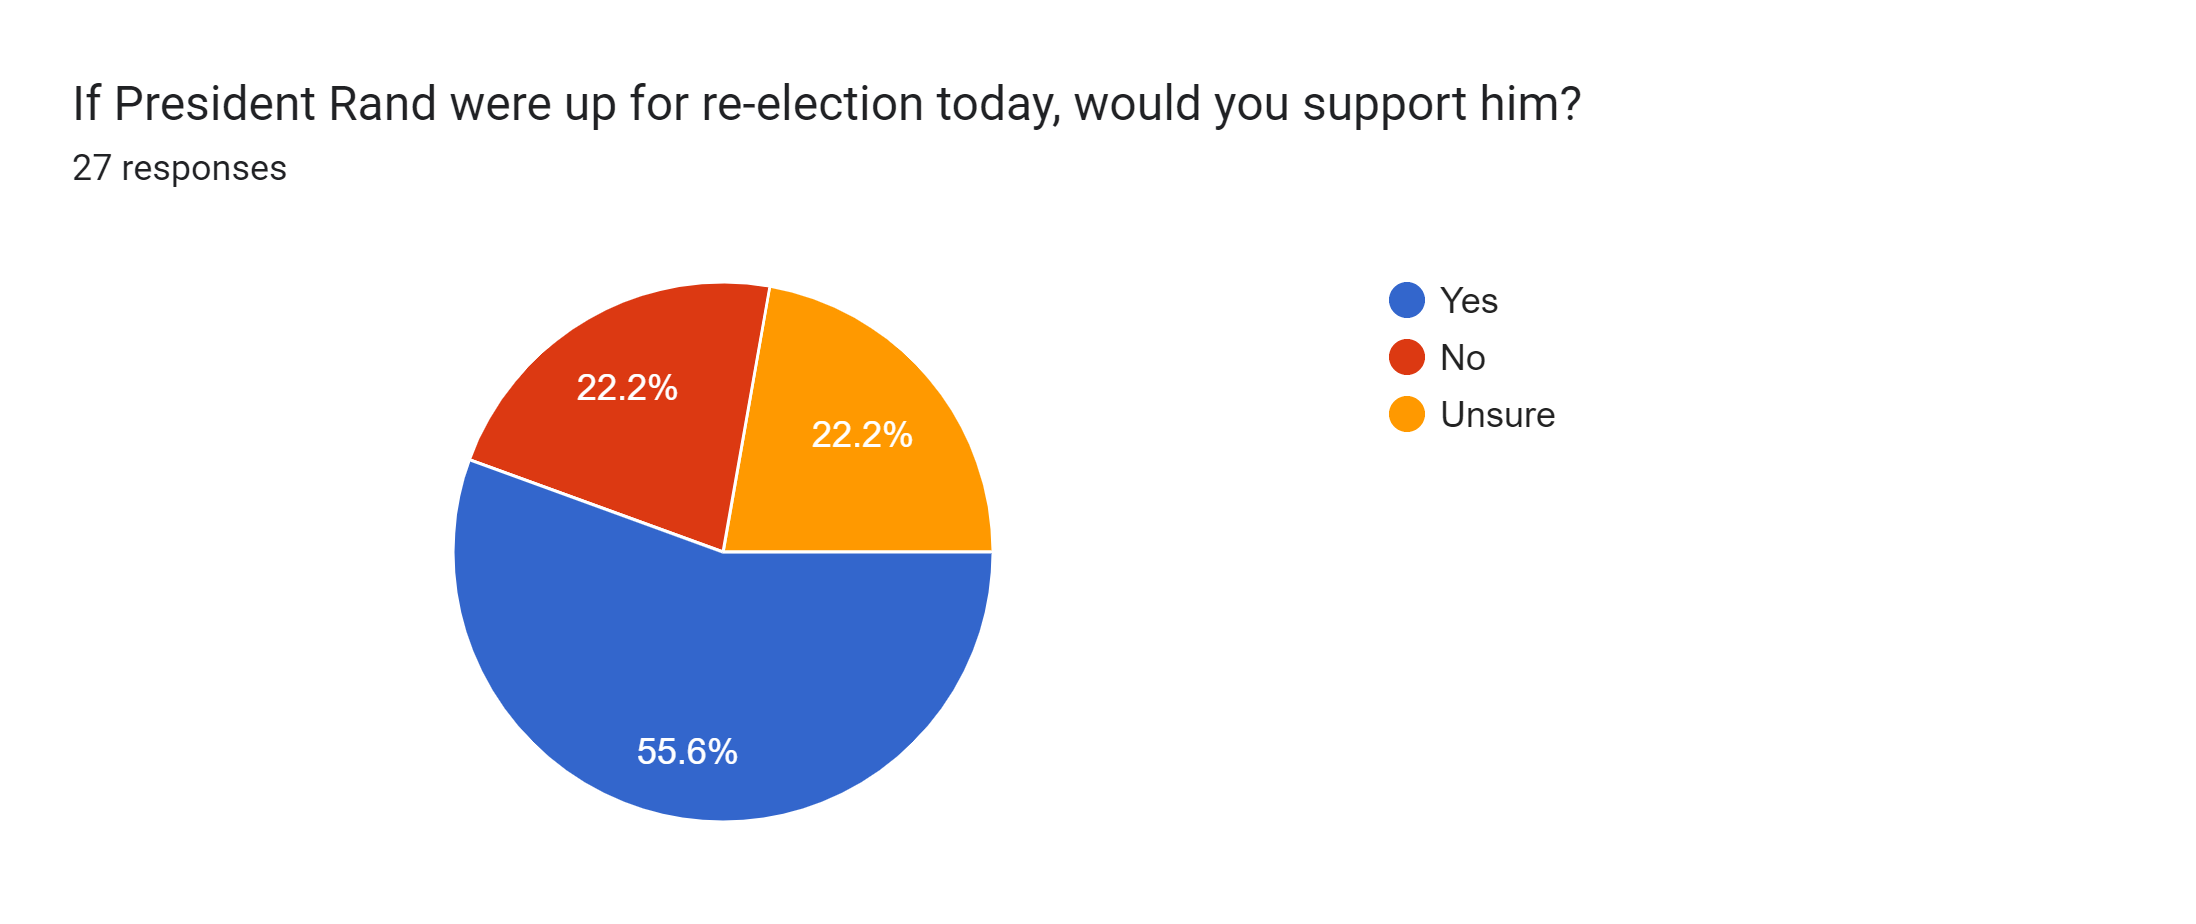 Forms response chart. Question title: If President Rand were up for re-election today, would you support him?. Number of responses: 27 responses.